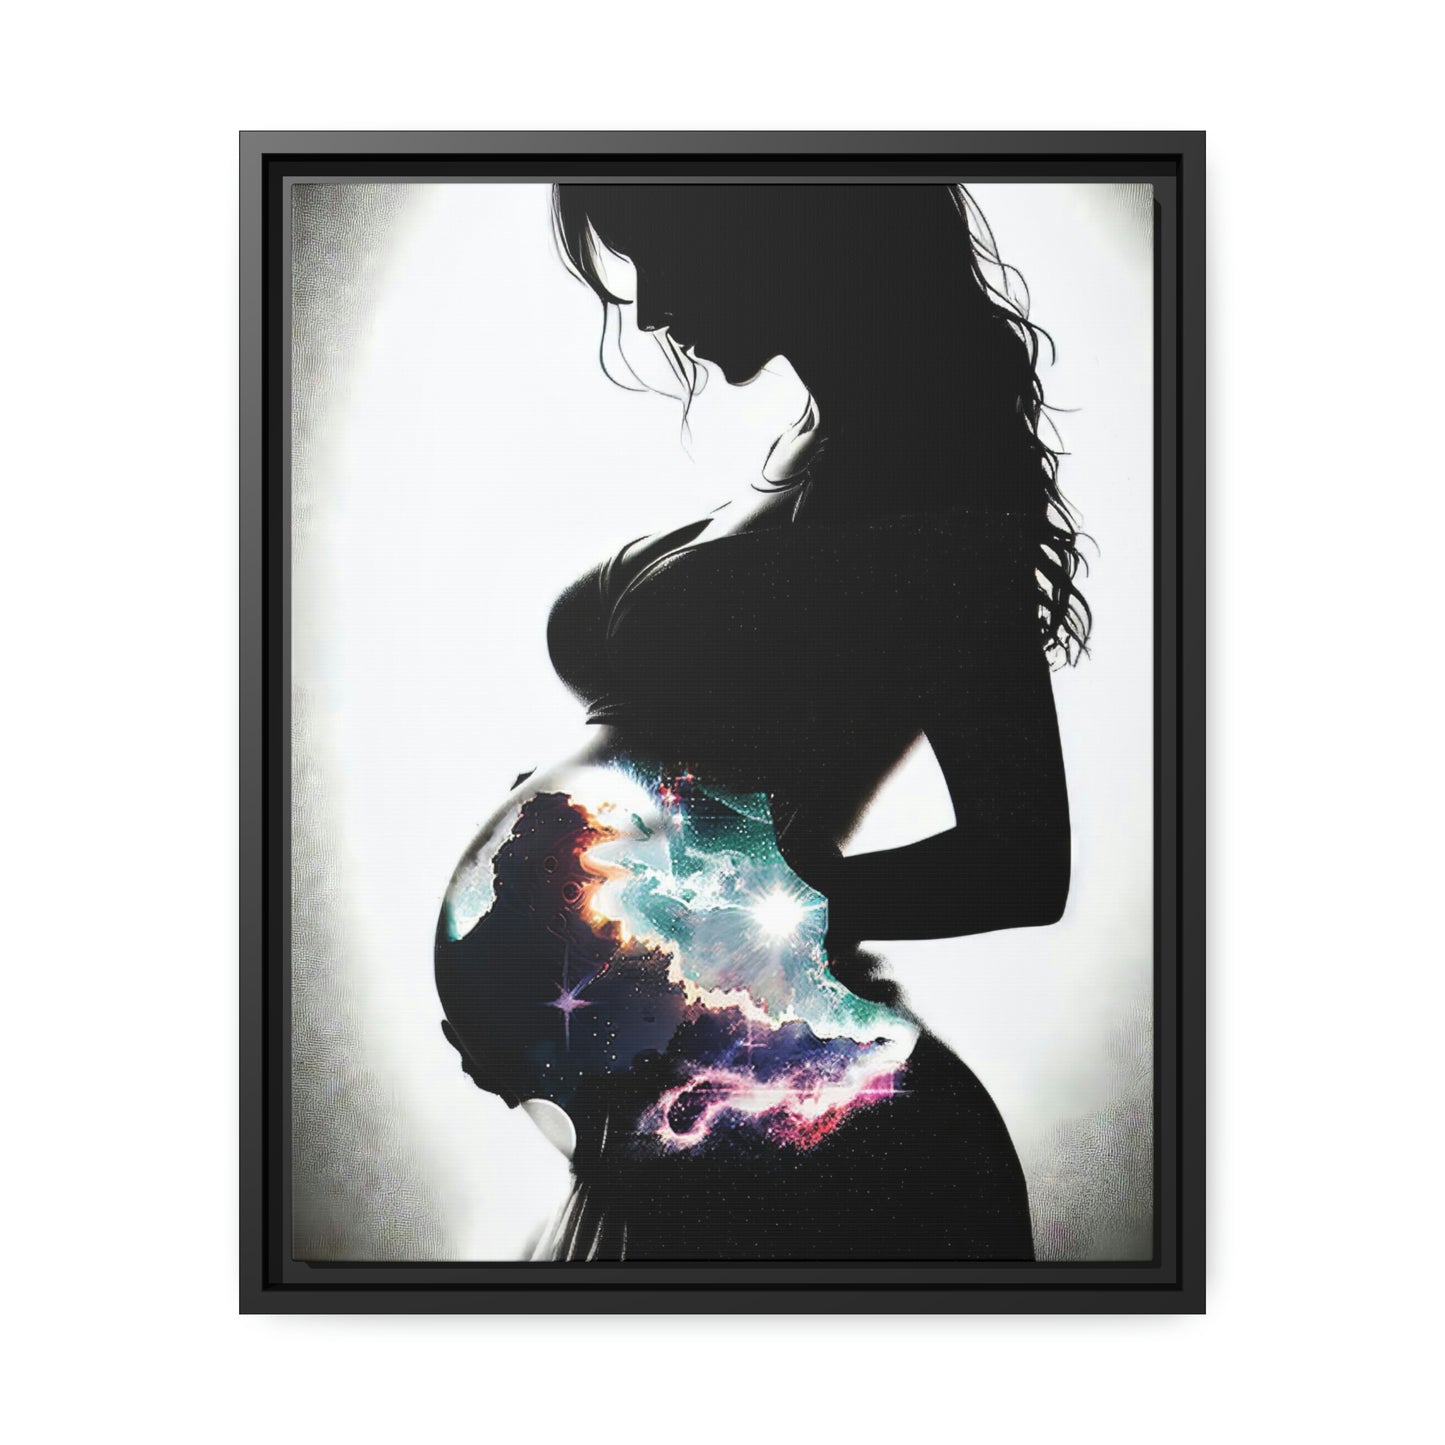 Birth Of The Universe - Gallery Grade Canvas In Floater Frame